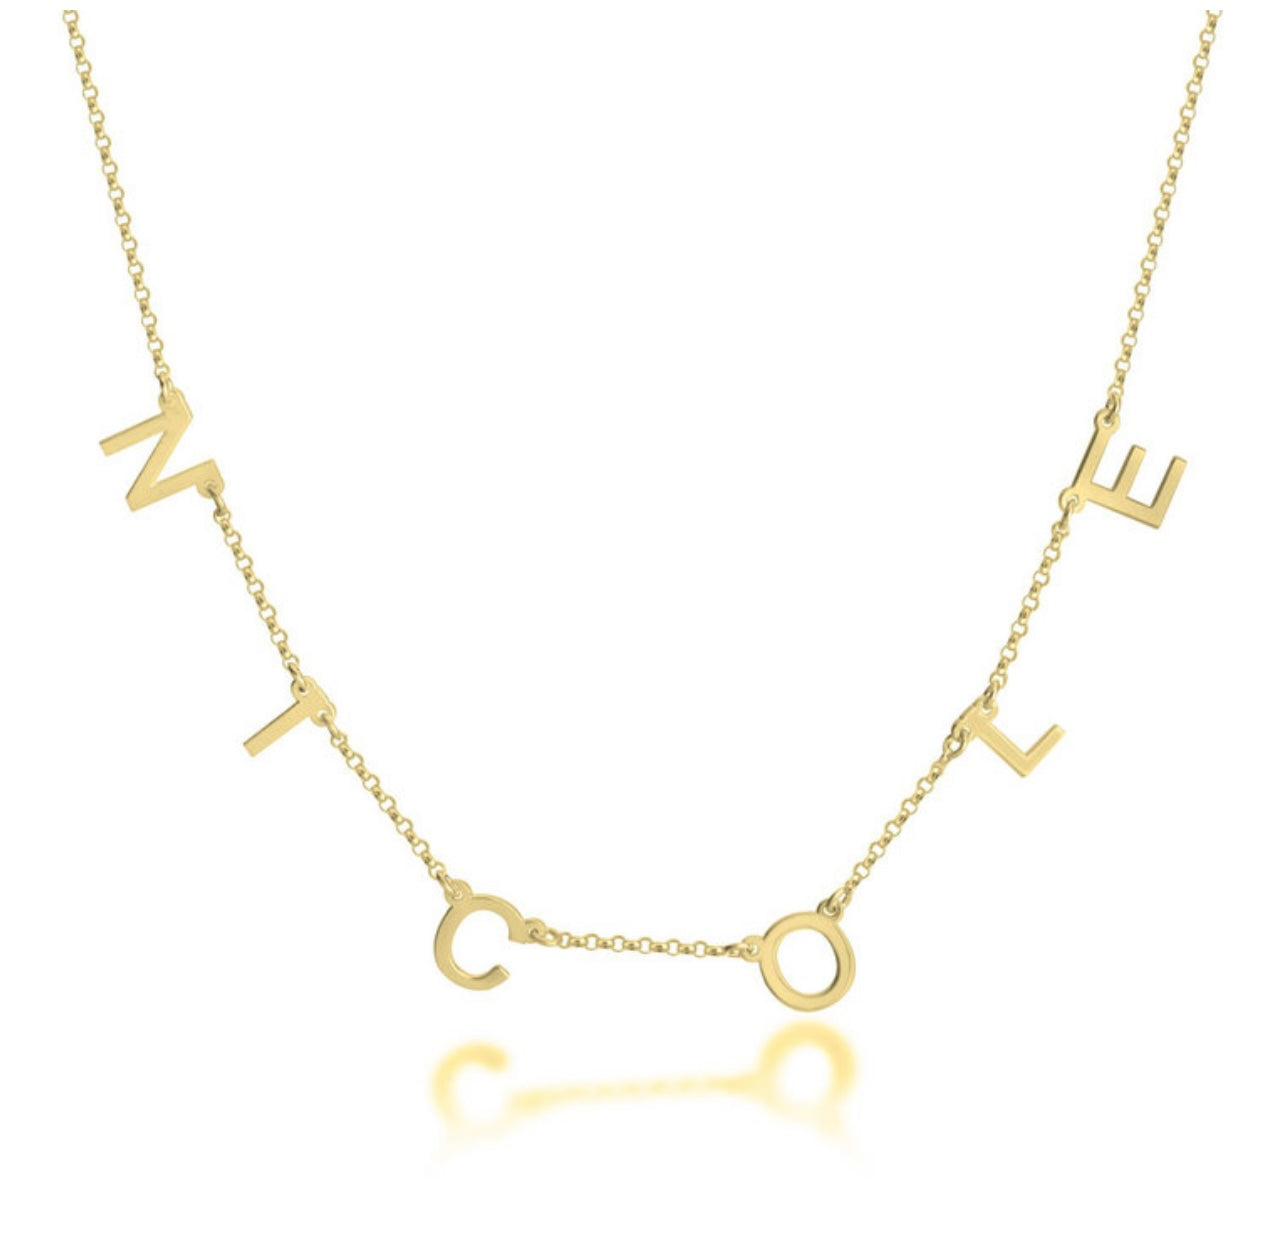 Spaced Letter Necklace